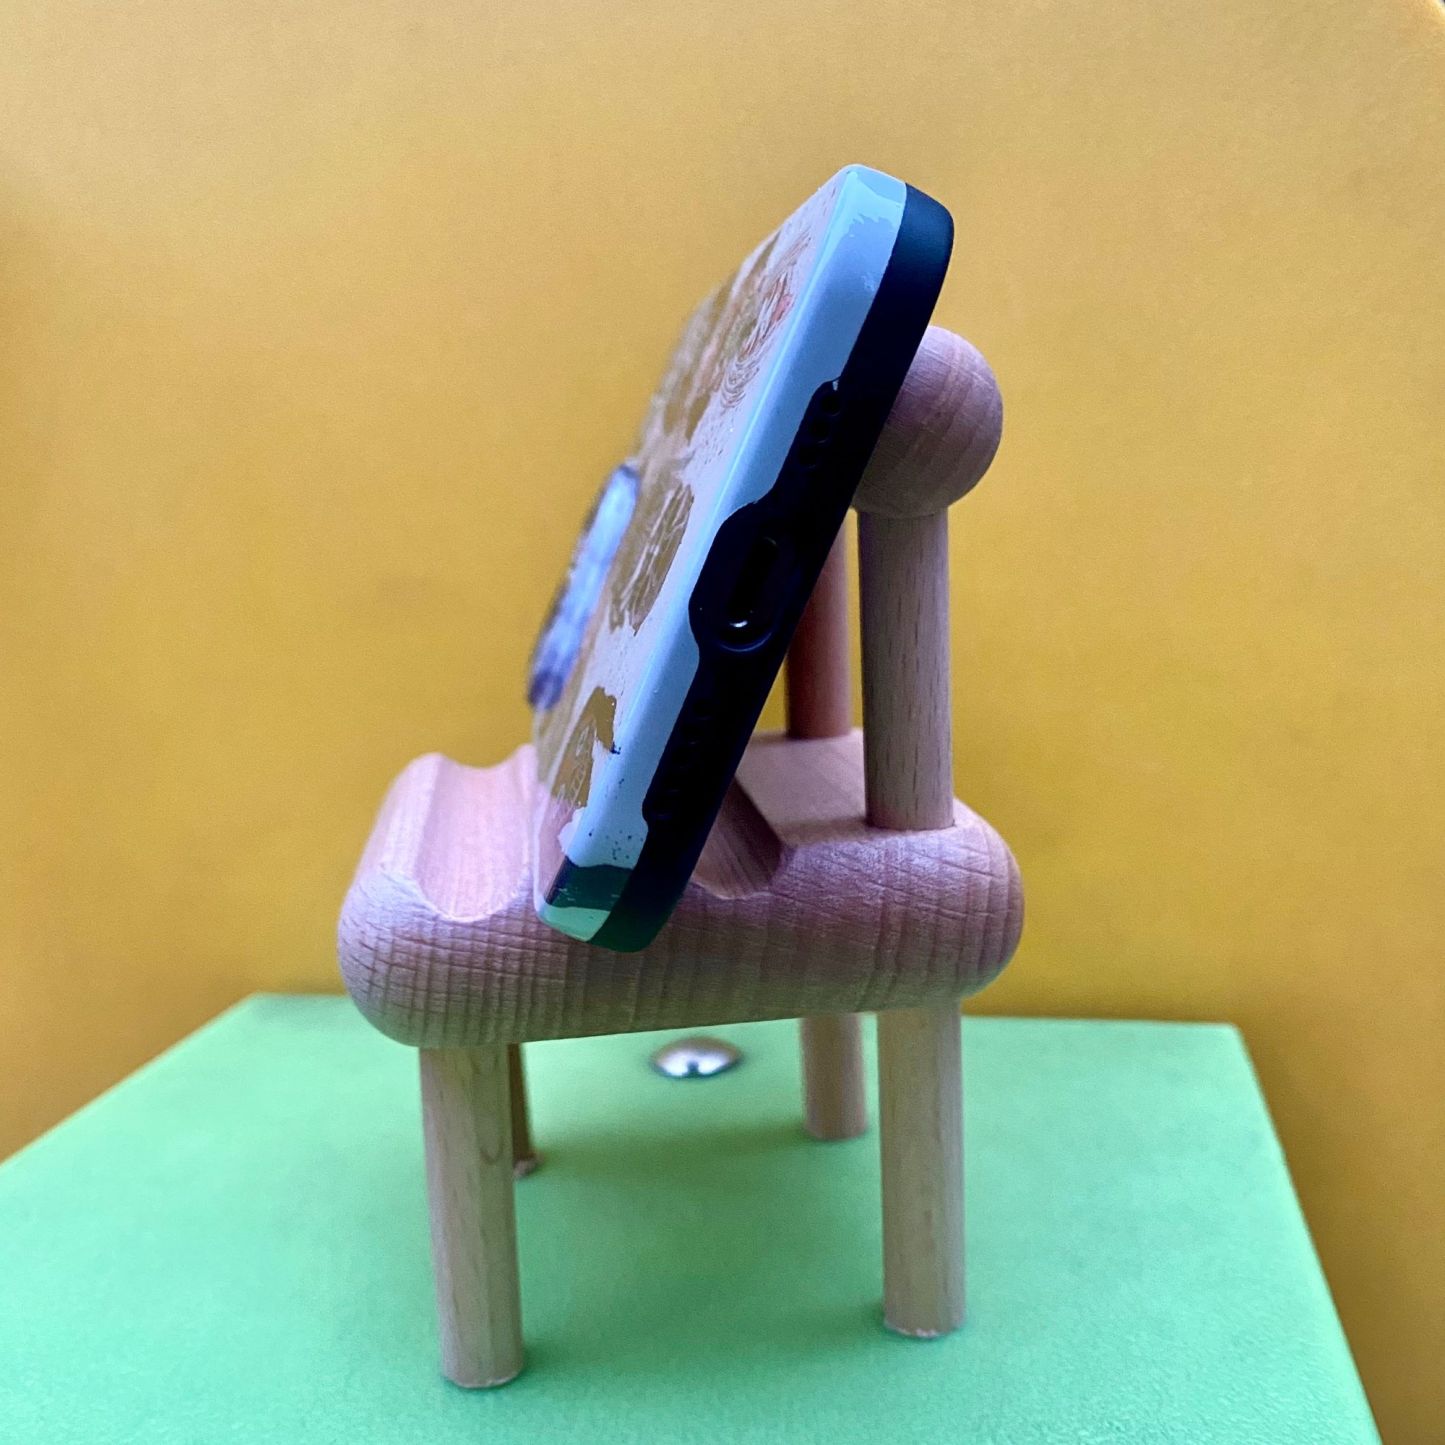 Designed Wooden Chair Functional Mobile Phone Holder